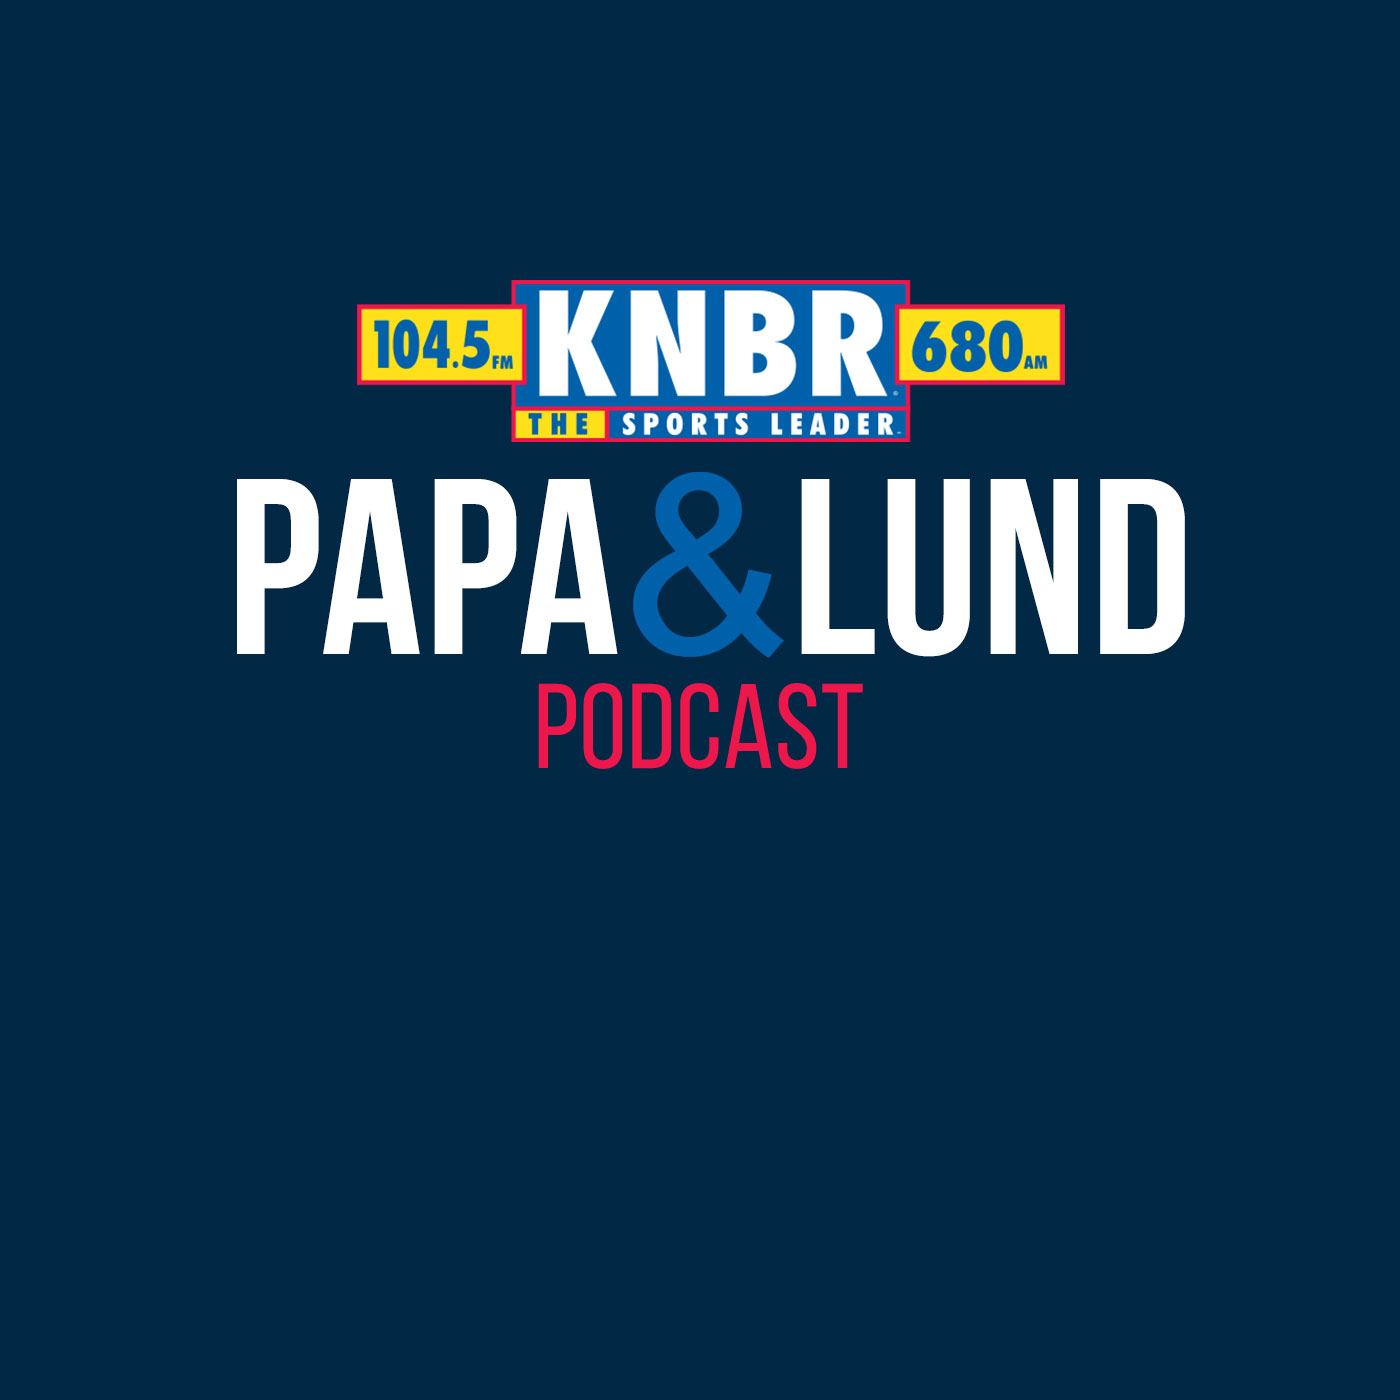 1-5 Warriors insider Monte Poole joins Papa & Lund: The return of Klay and how the Warriors can get even better